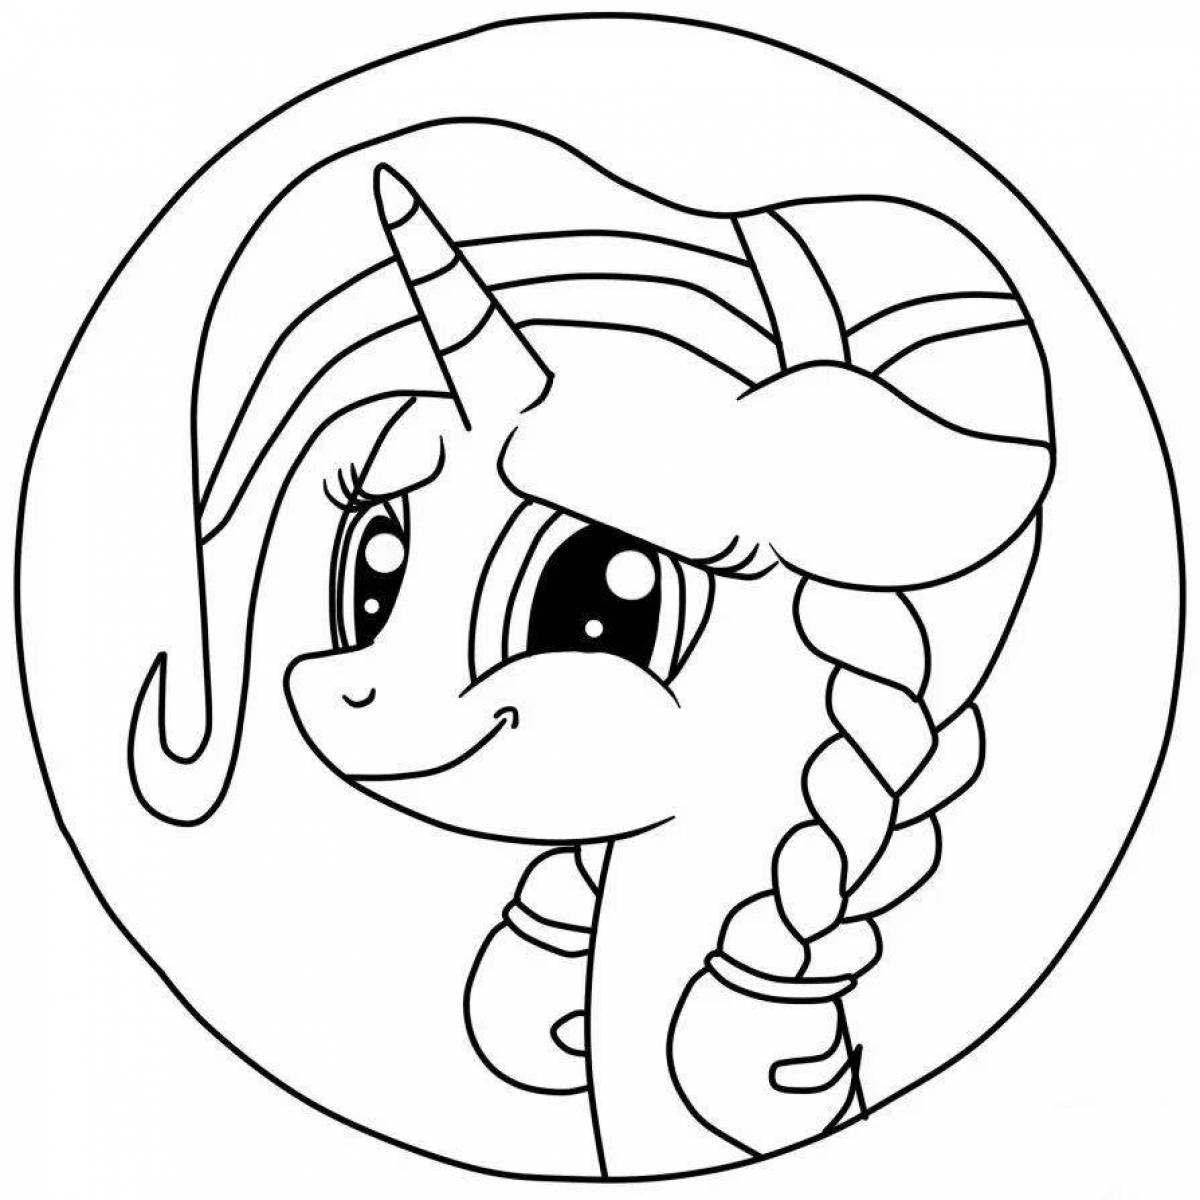 Awesome ponyville pony coloring page